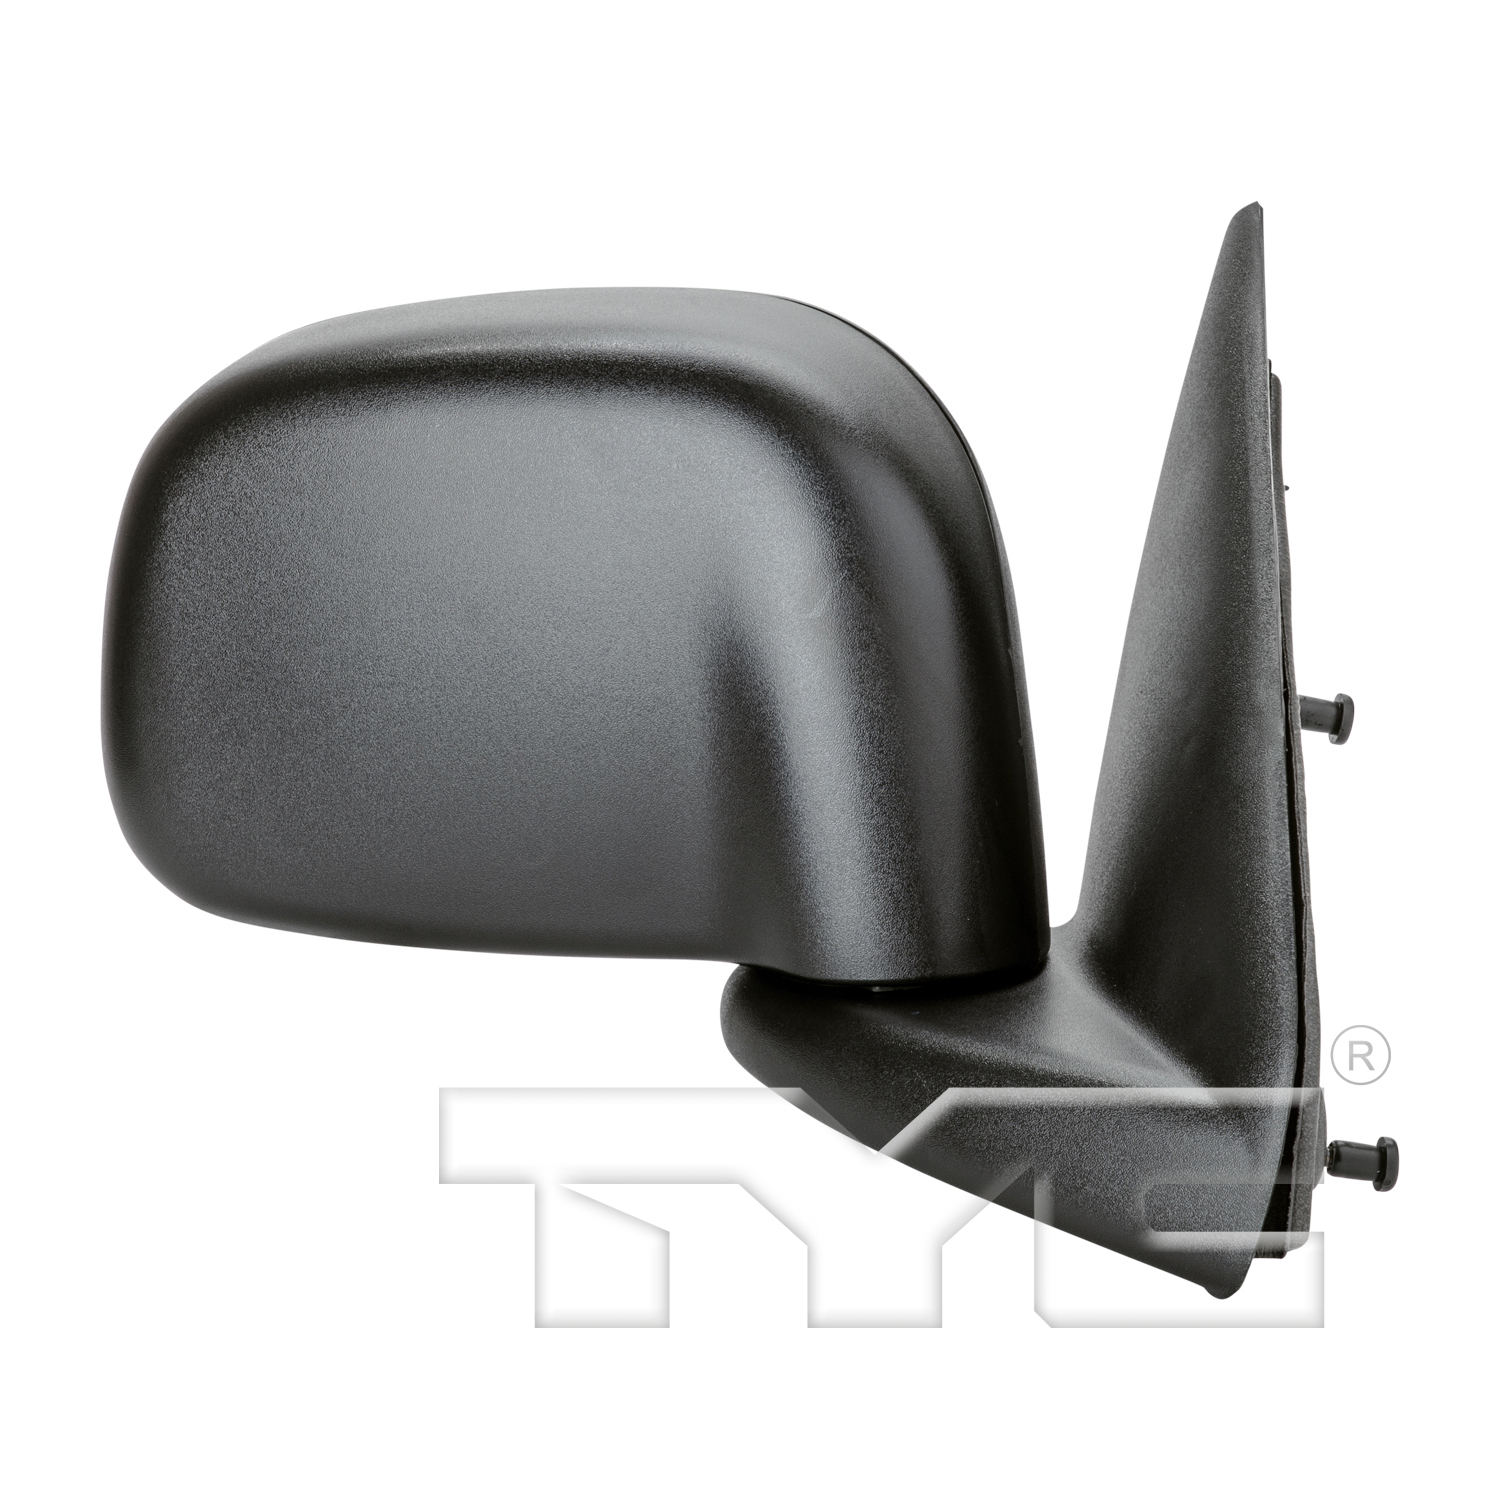 Aftermarket MIRRORS for DODGE - RAM 3500, RAM 3500,05-09,RT Mirror outside rear view